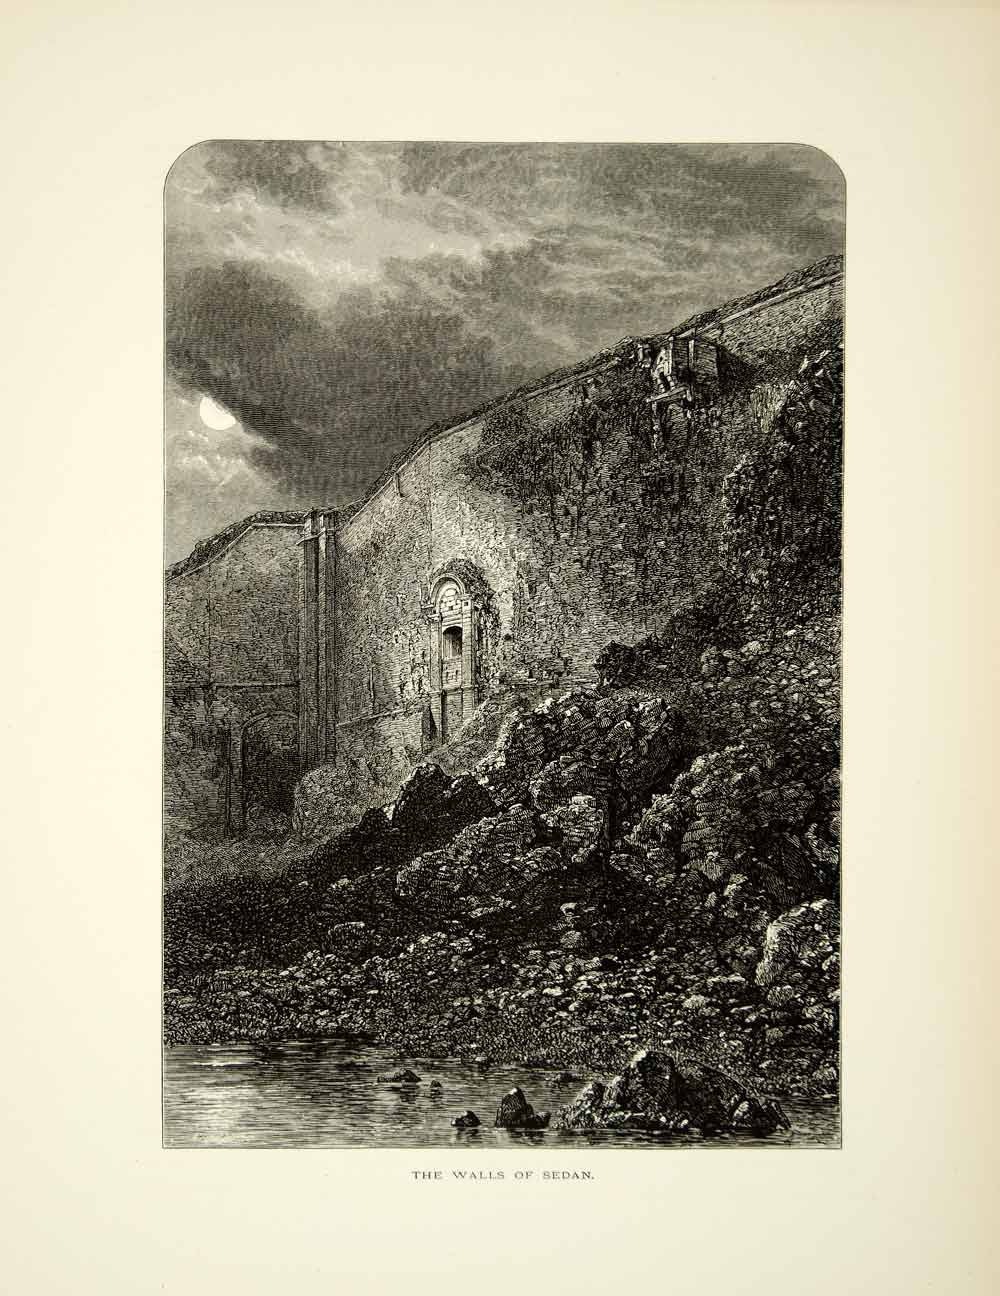 1878 Wood Engraving Art Fortified Walls Sedan Ardennes France Europe Meuse YPE3